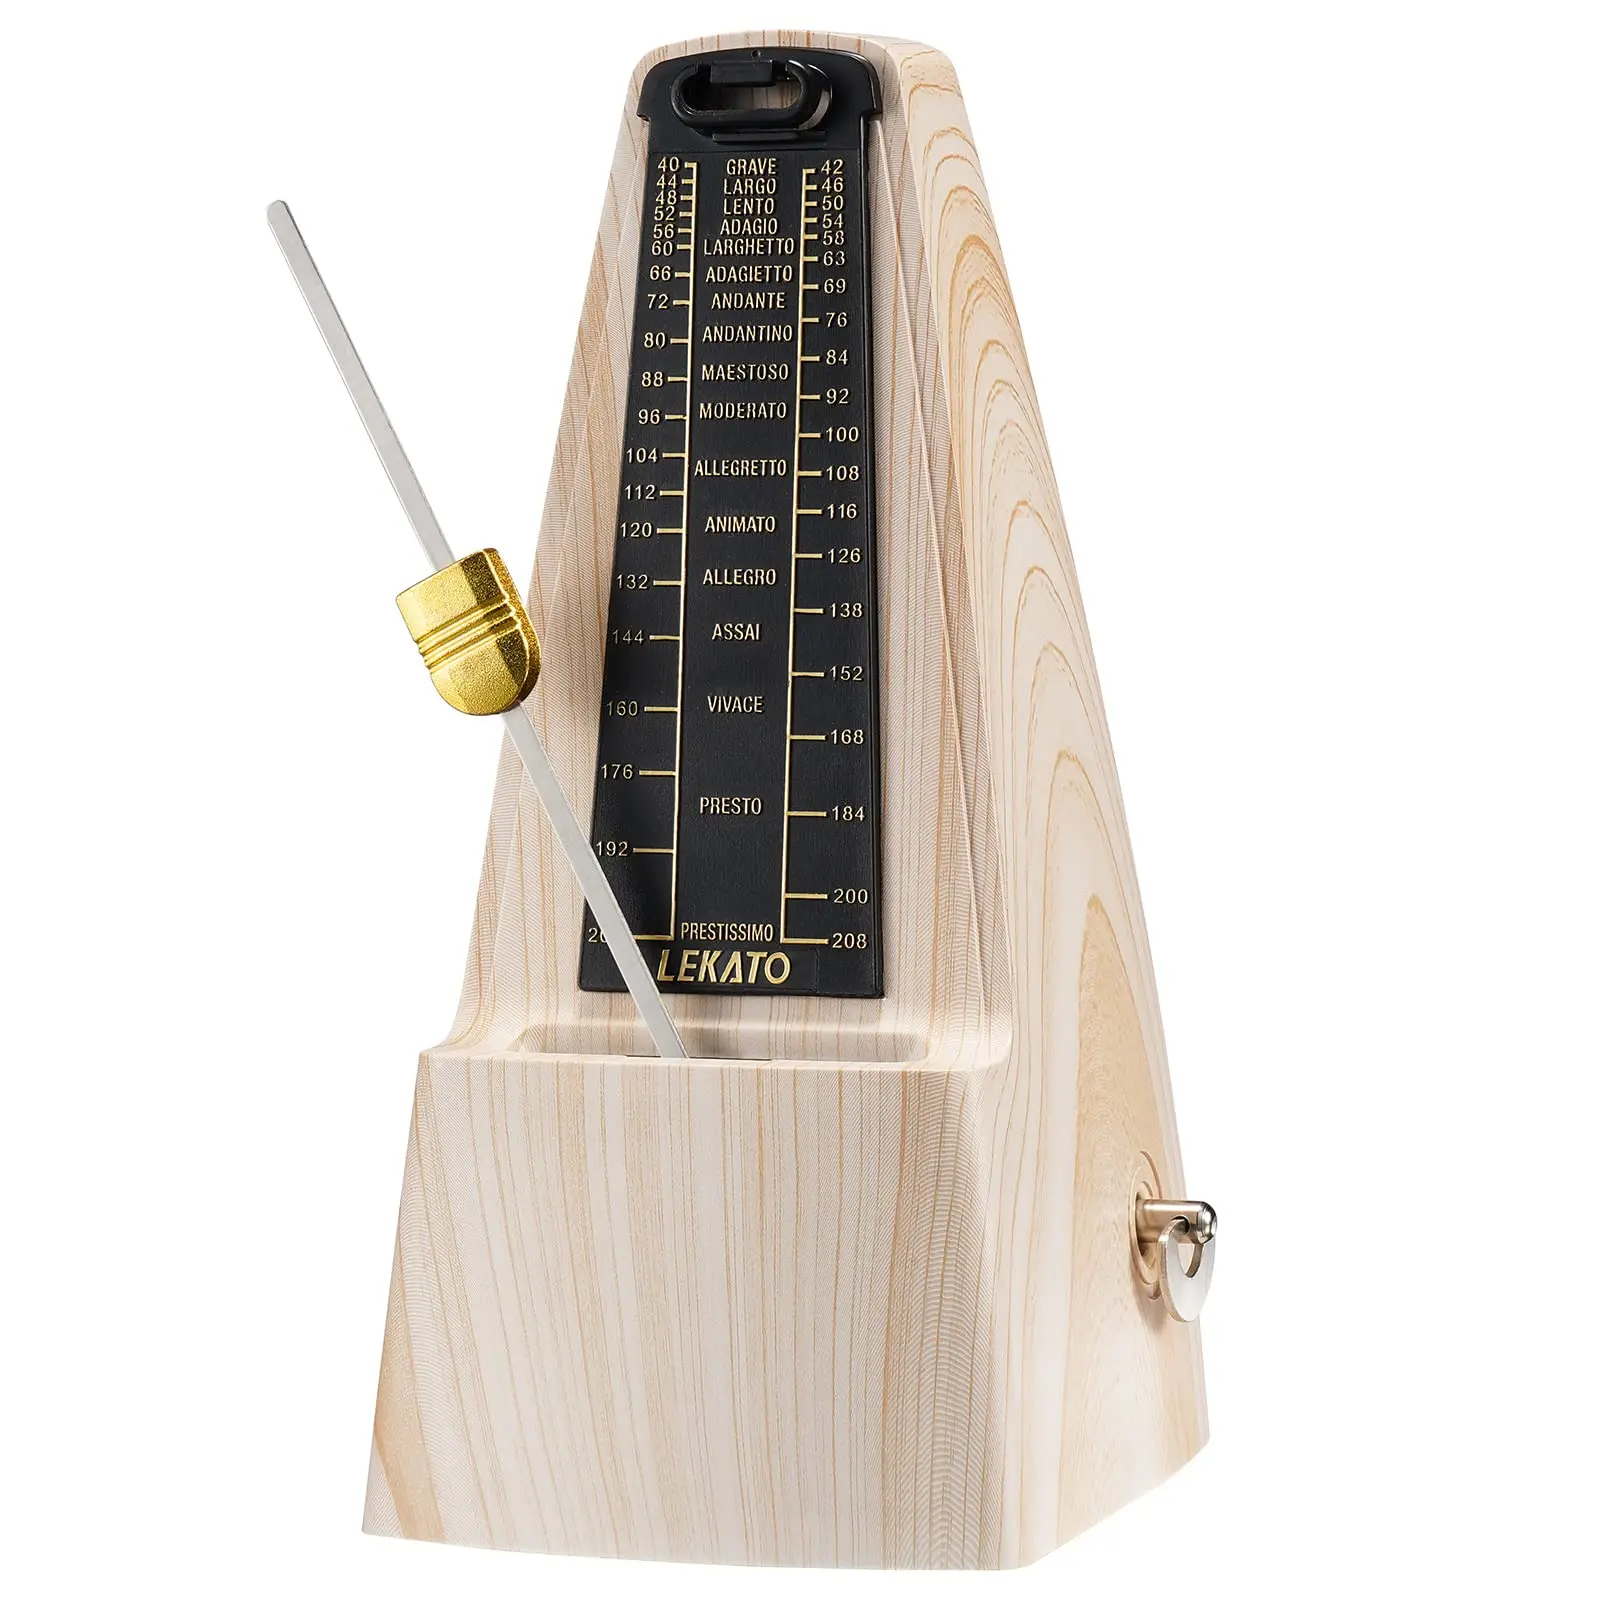 best metronome for violin - What type of metronome is best